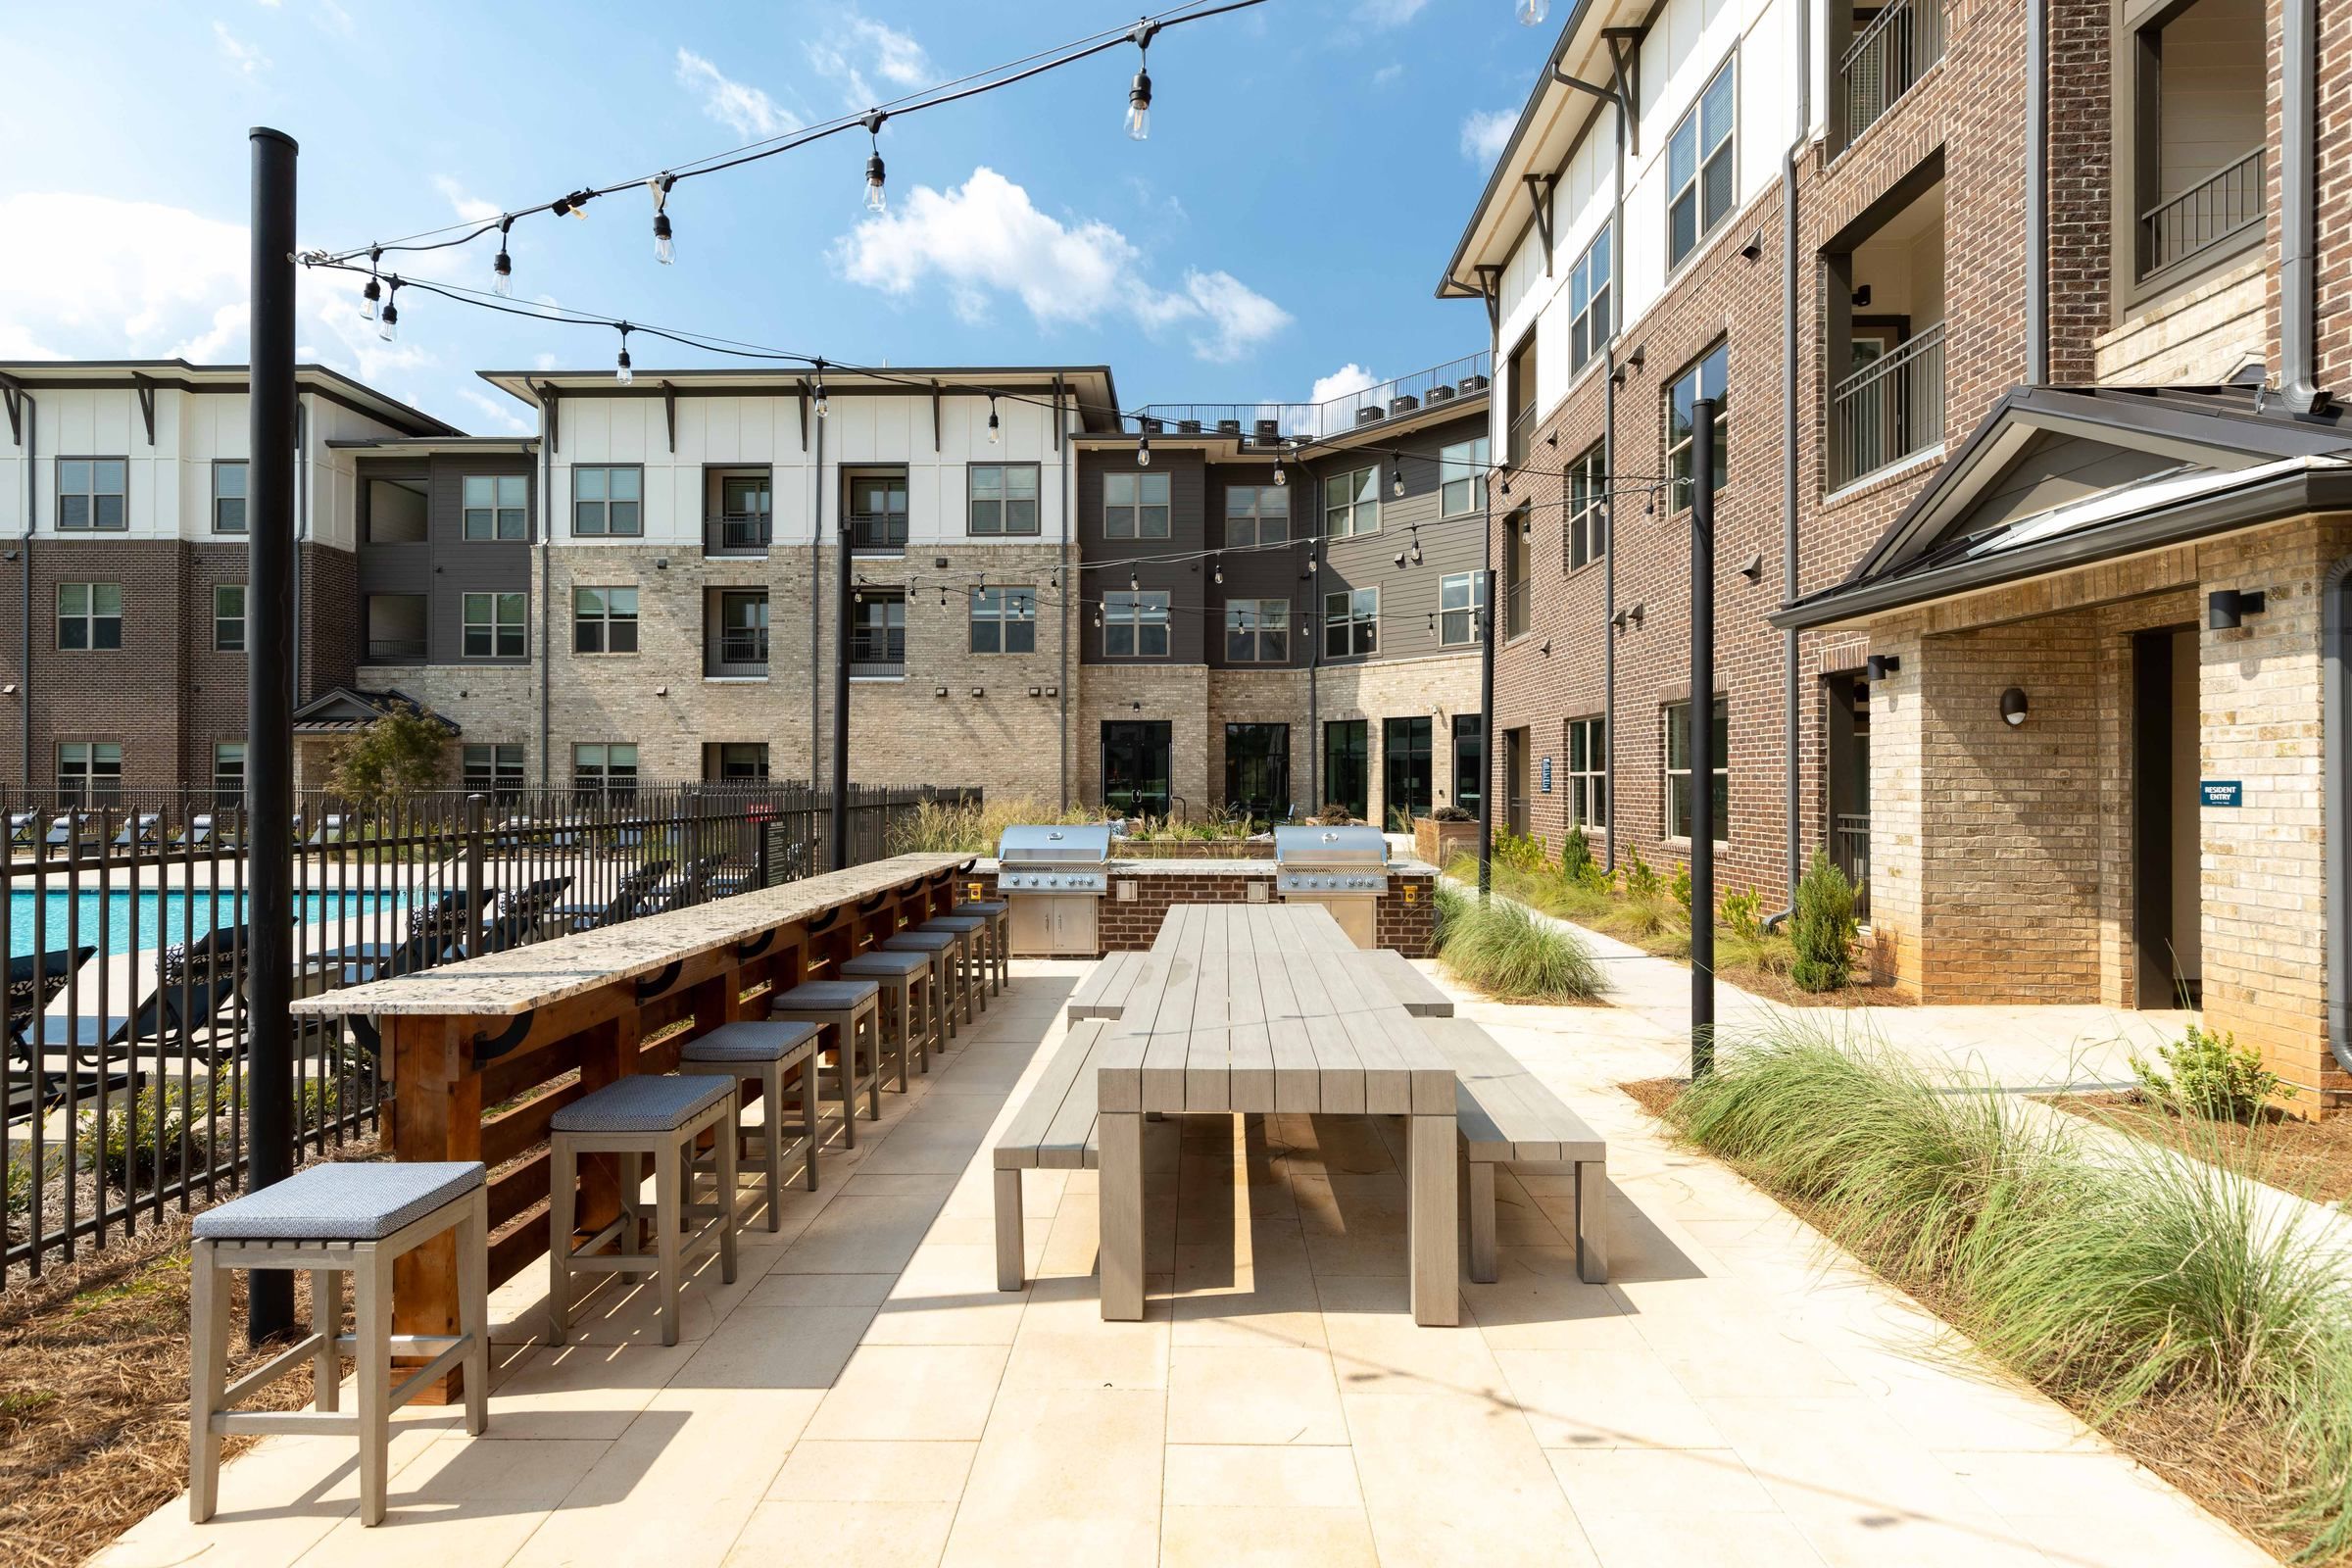 The outdoor communal dining and barbecue area at Alta Ashley Park, complete with long picnic tables and grills, inviting residents to enjoy alfresco gatherings.